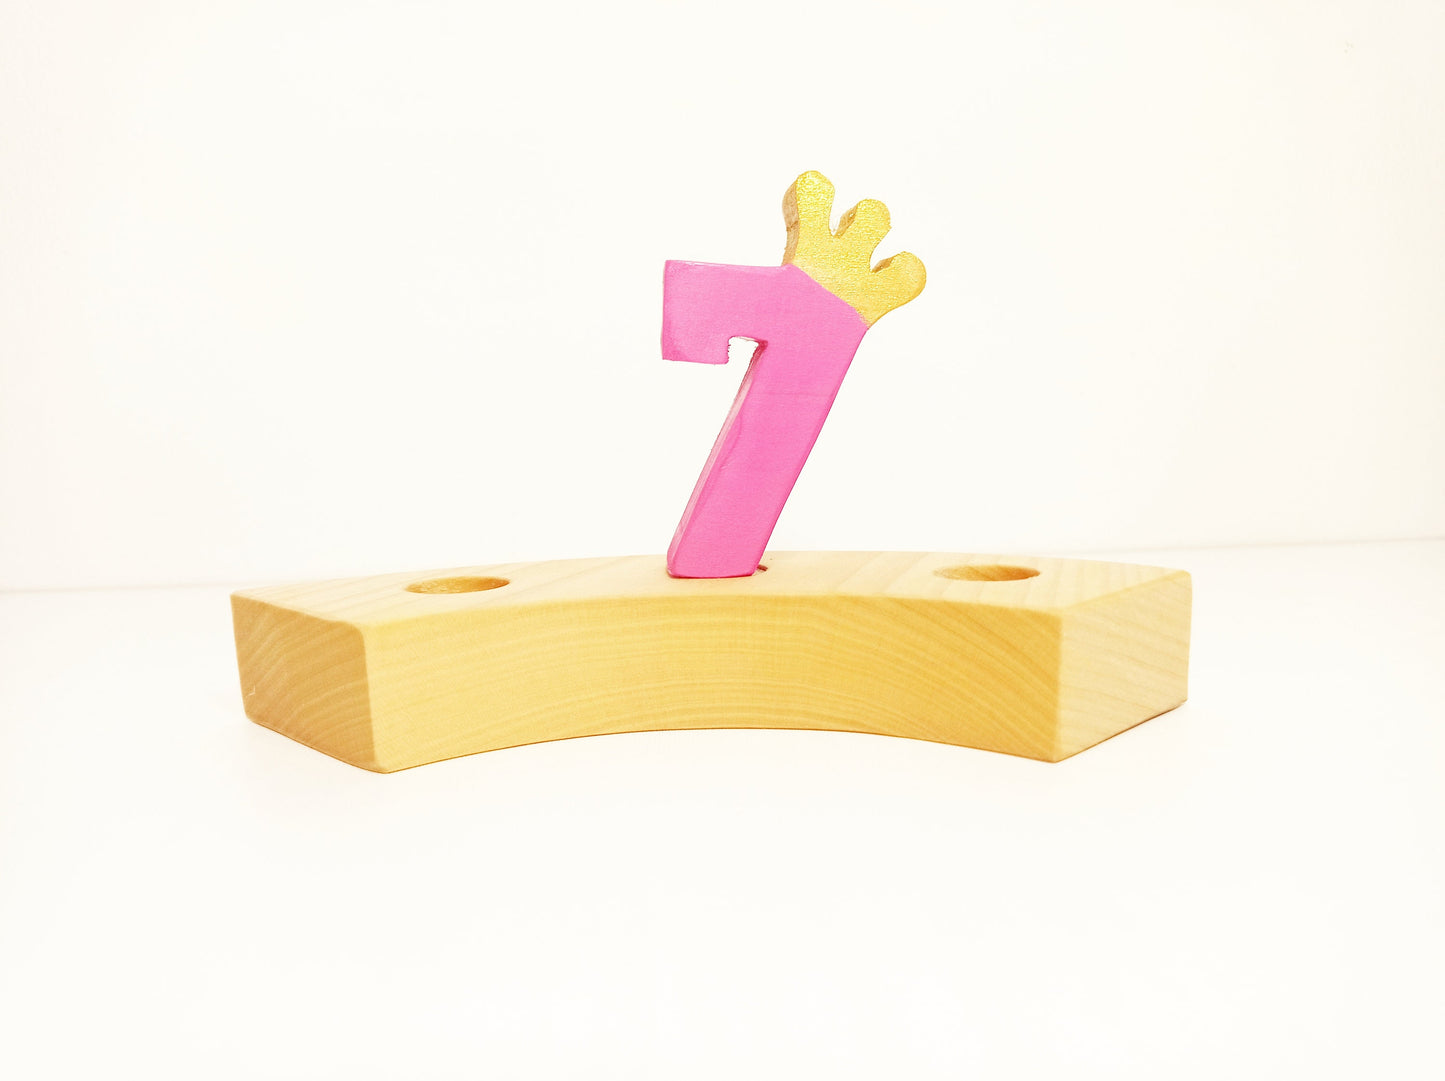 Number 7 birthday ring ornament, waldorf ring ornament, waldorf decoration, birthday ring, birthday decorations, waldorf numbers, jaar ring